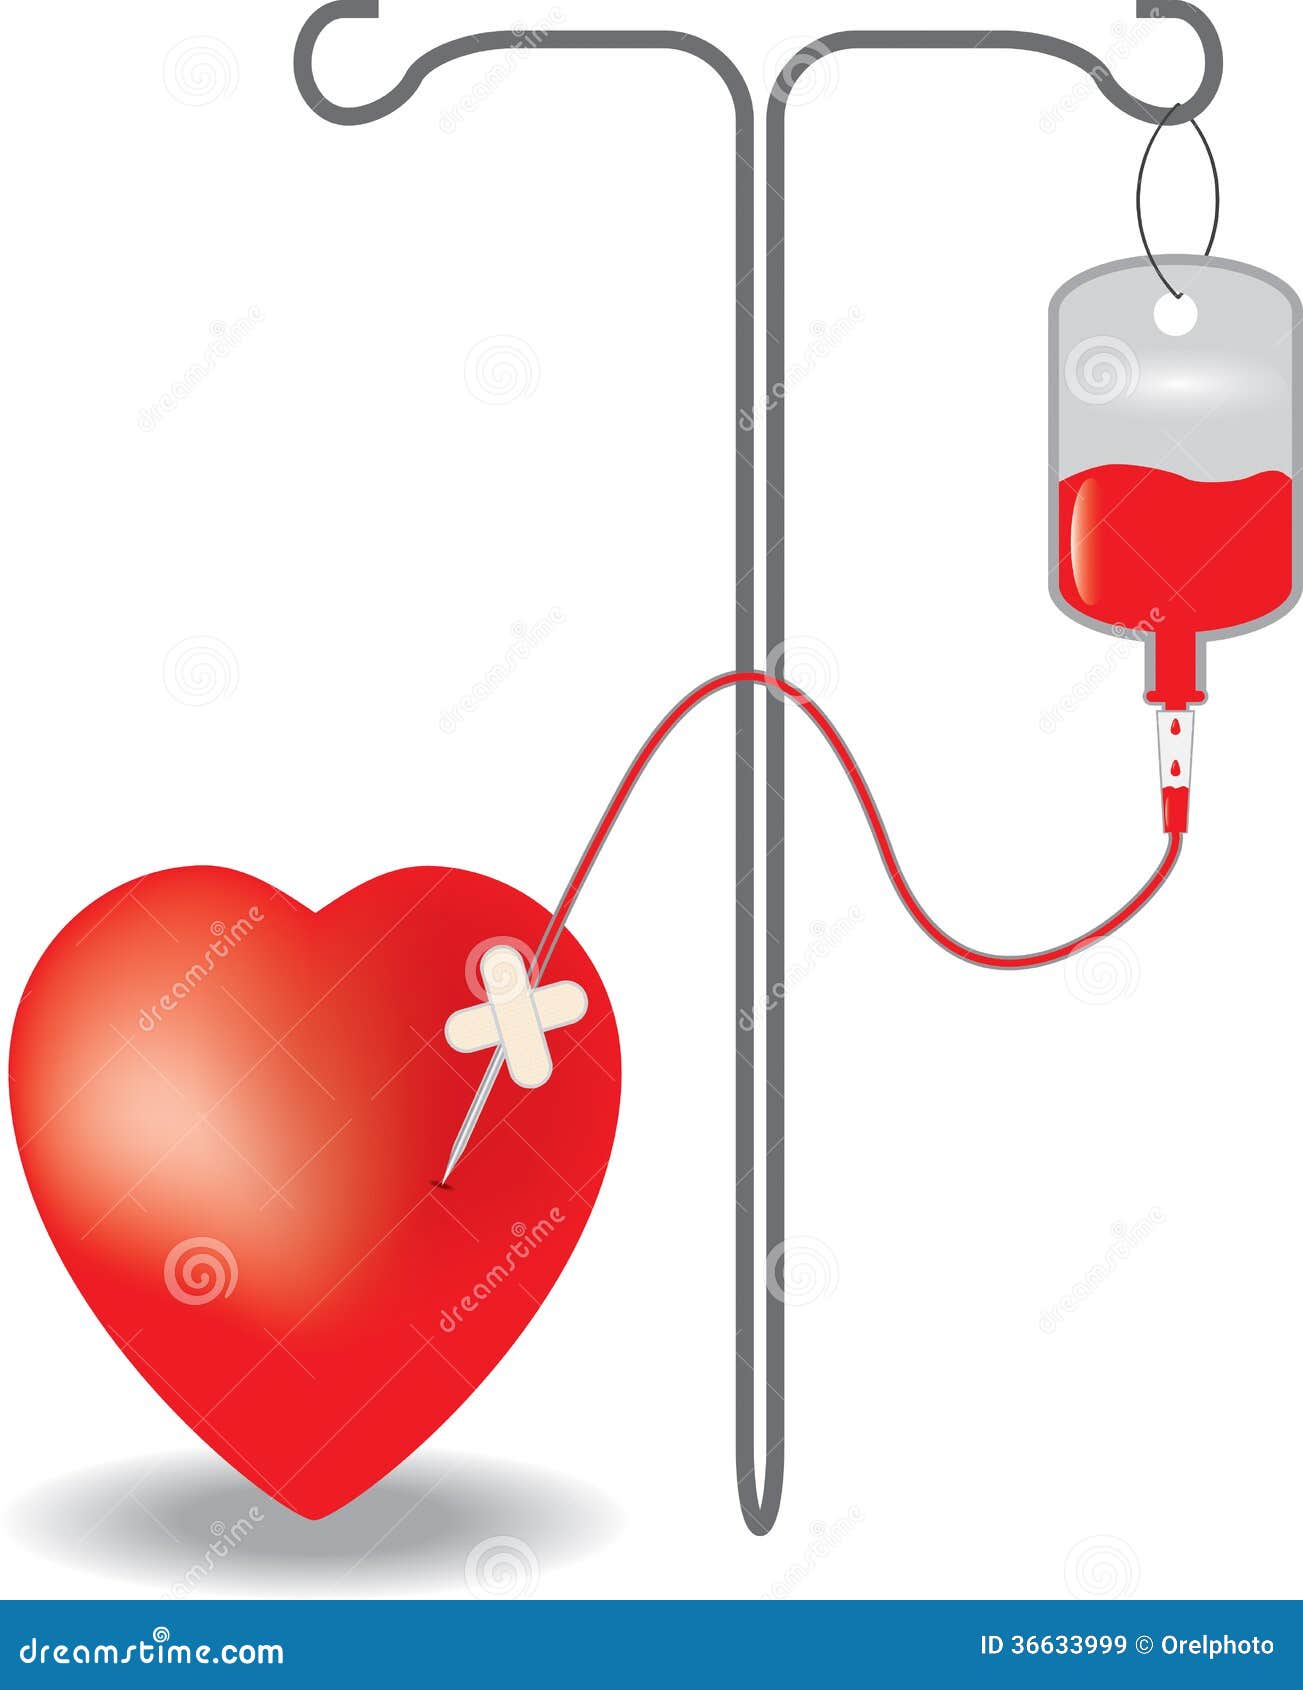 clipart blood donation - photo #44